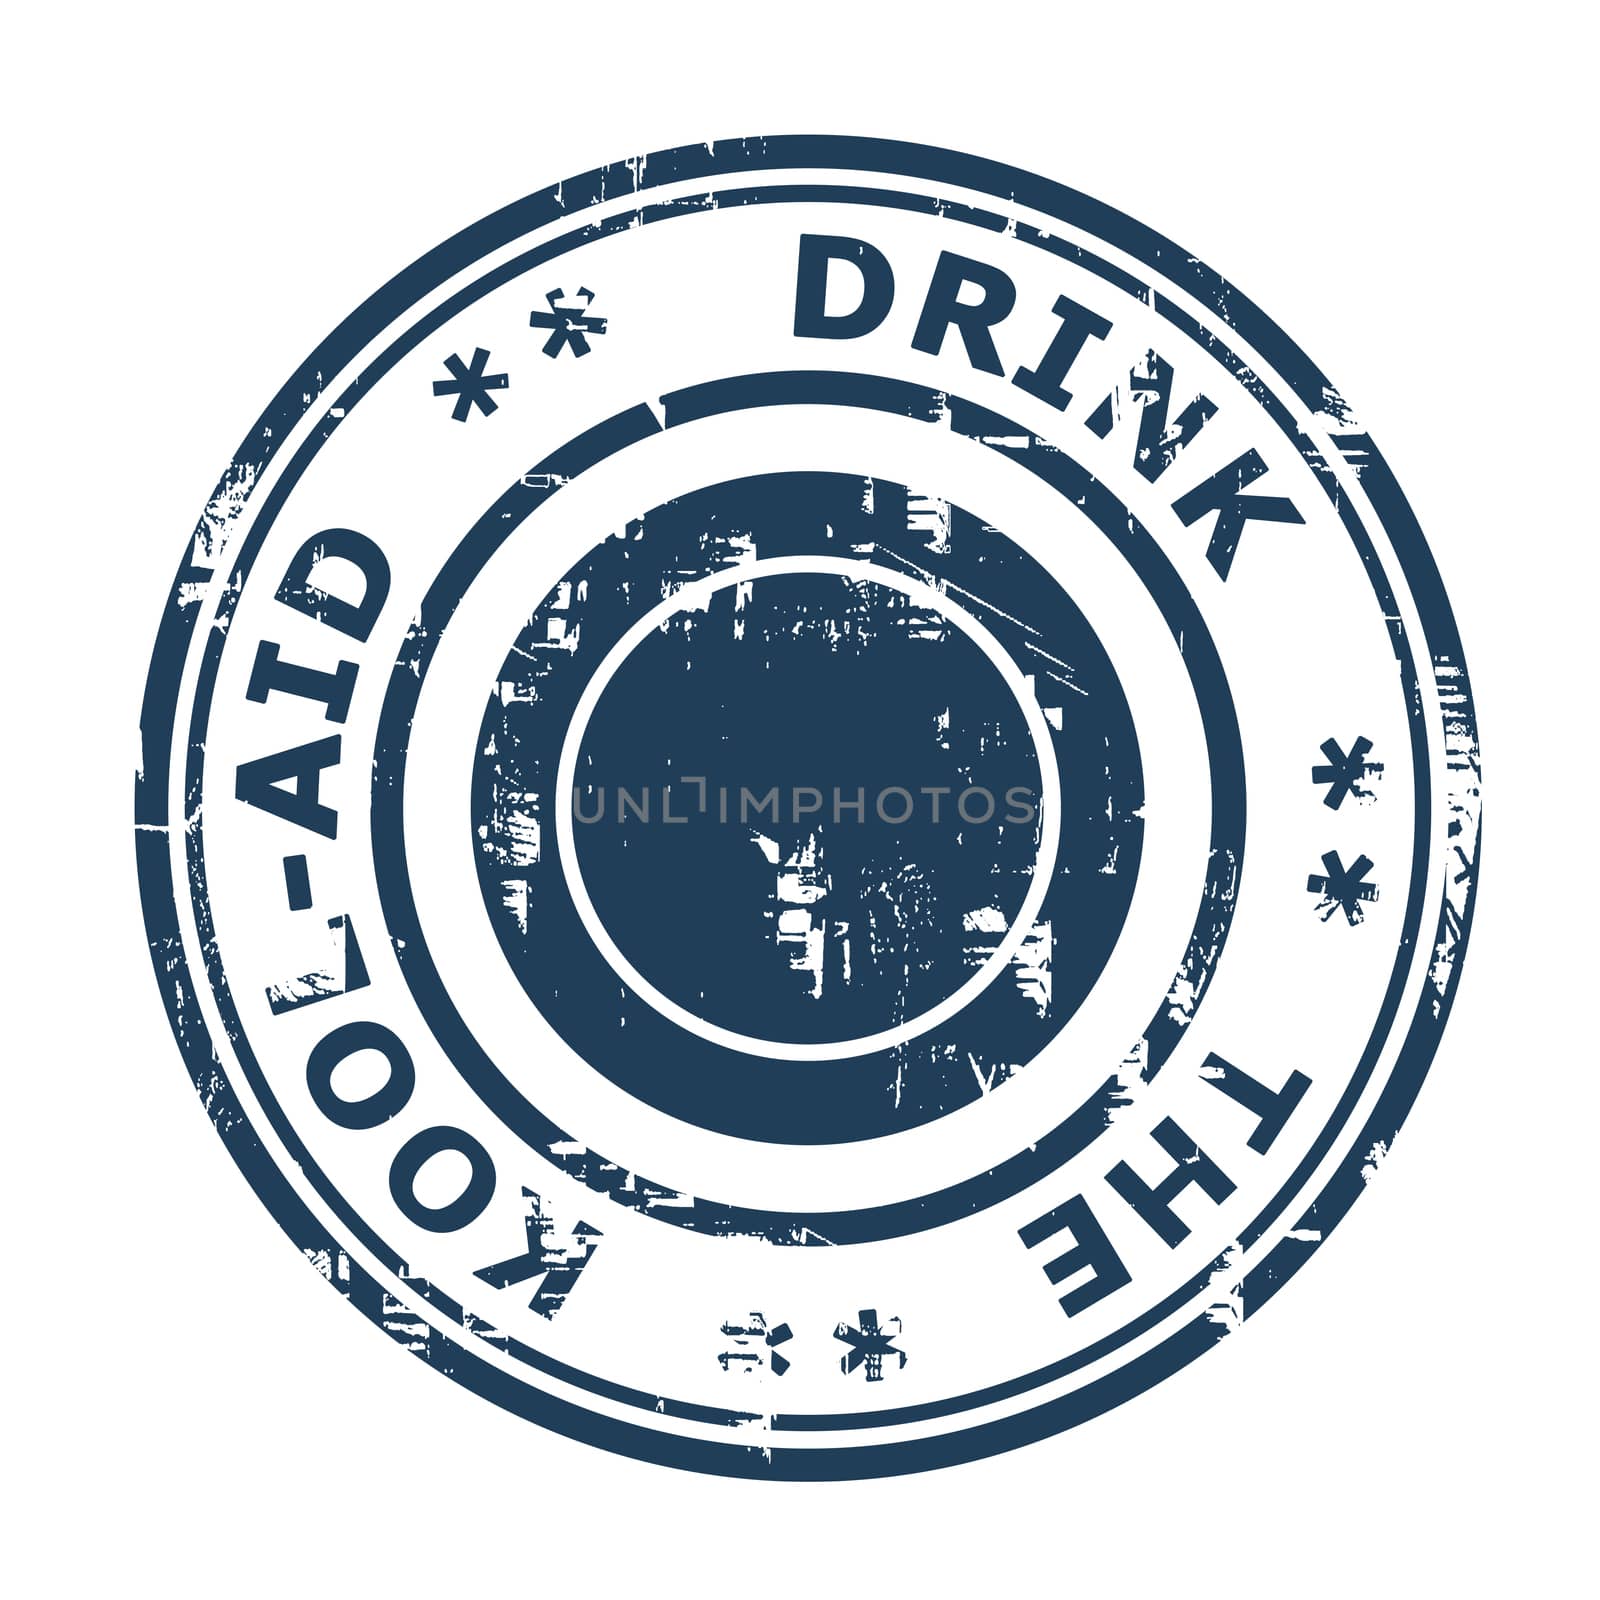 Drink the Cool-Aid business concept stamp isolated on a white background.